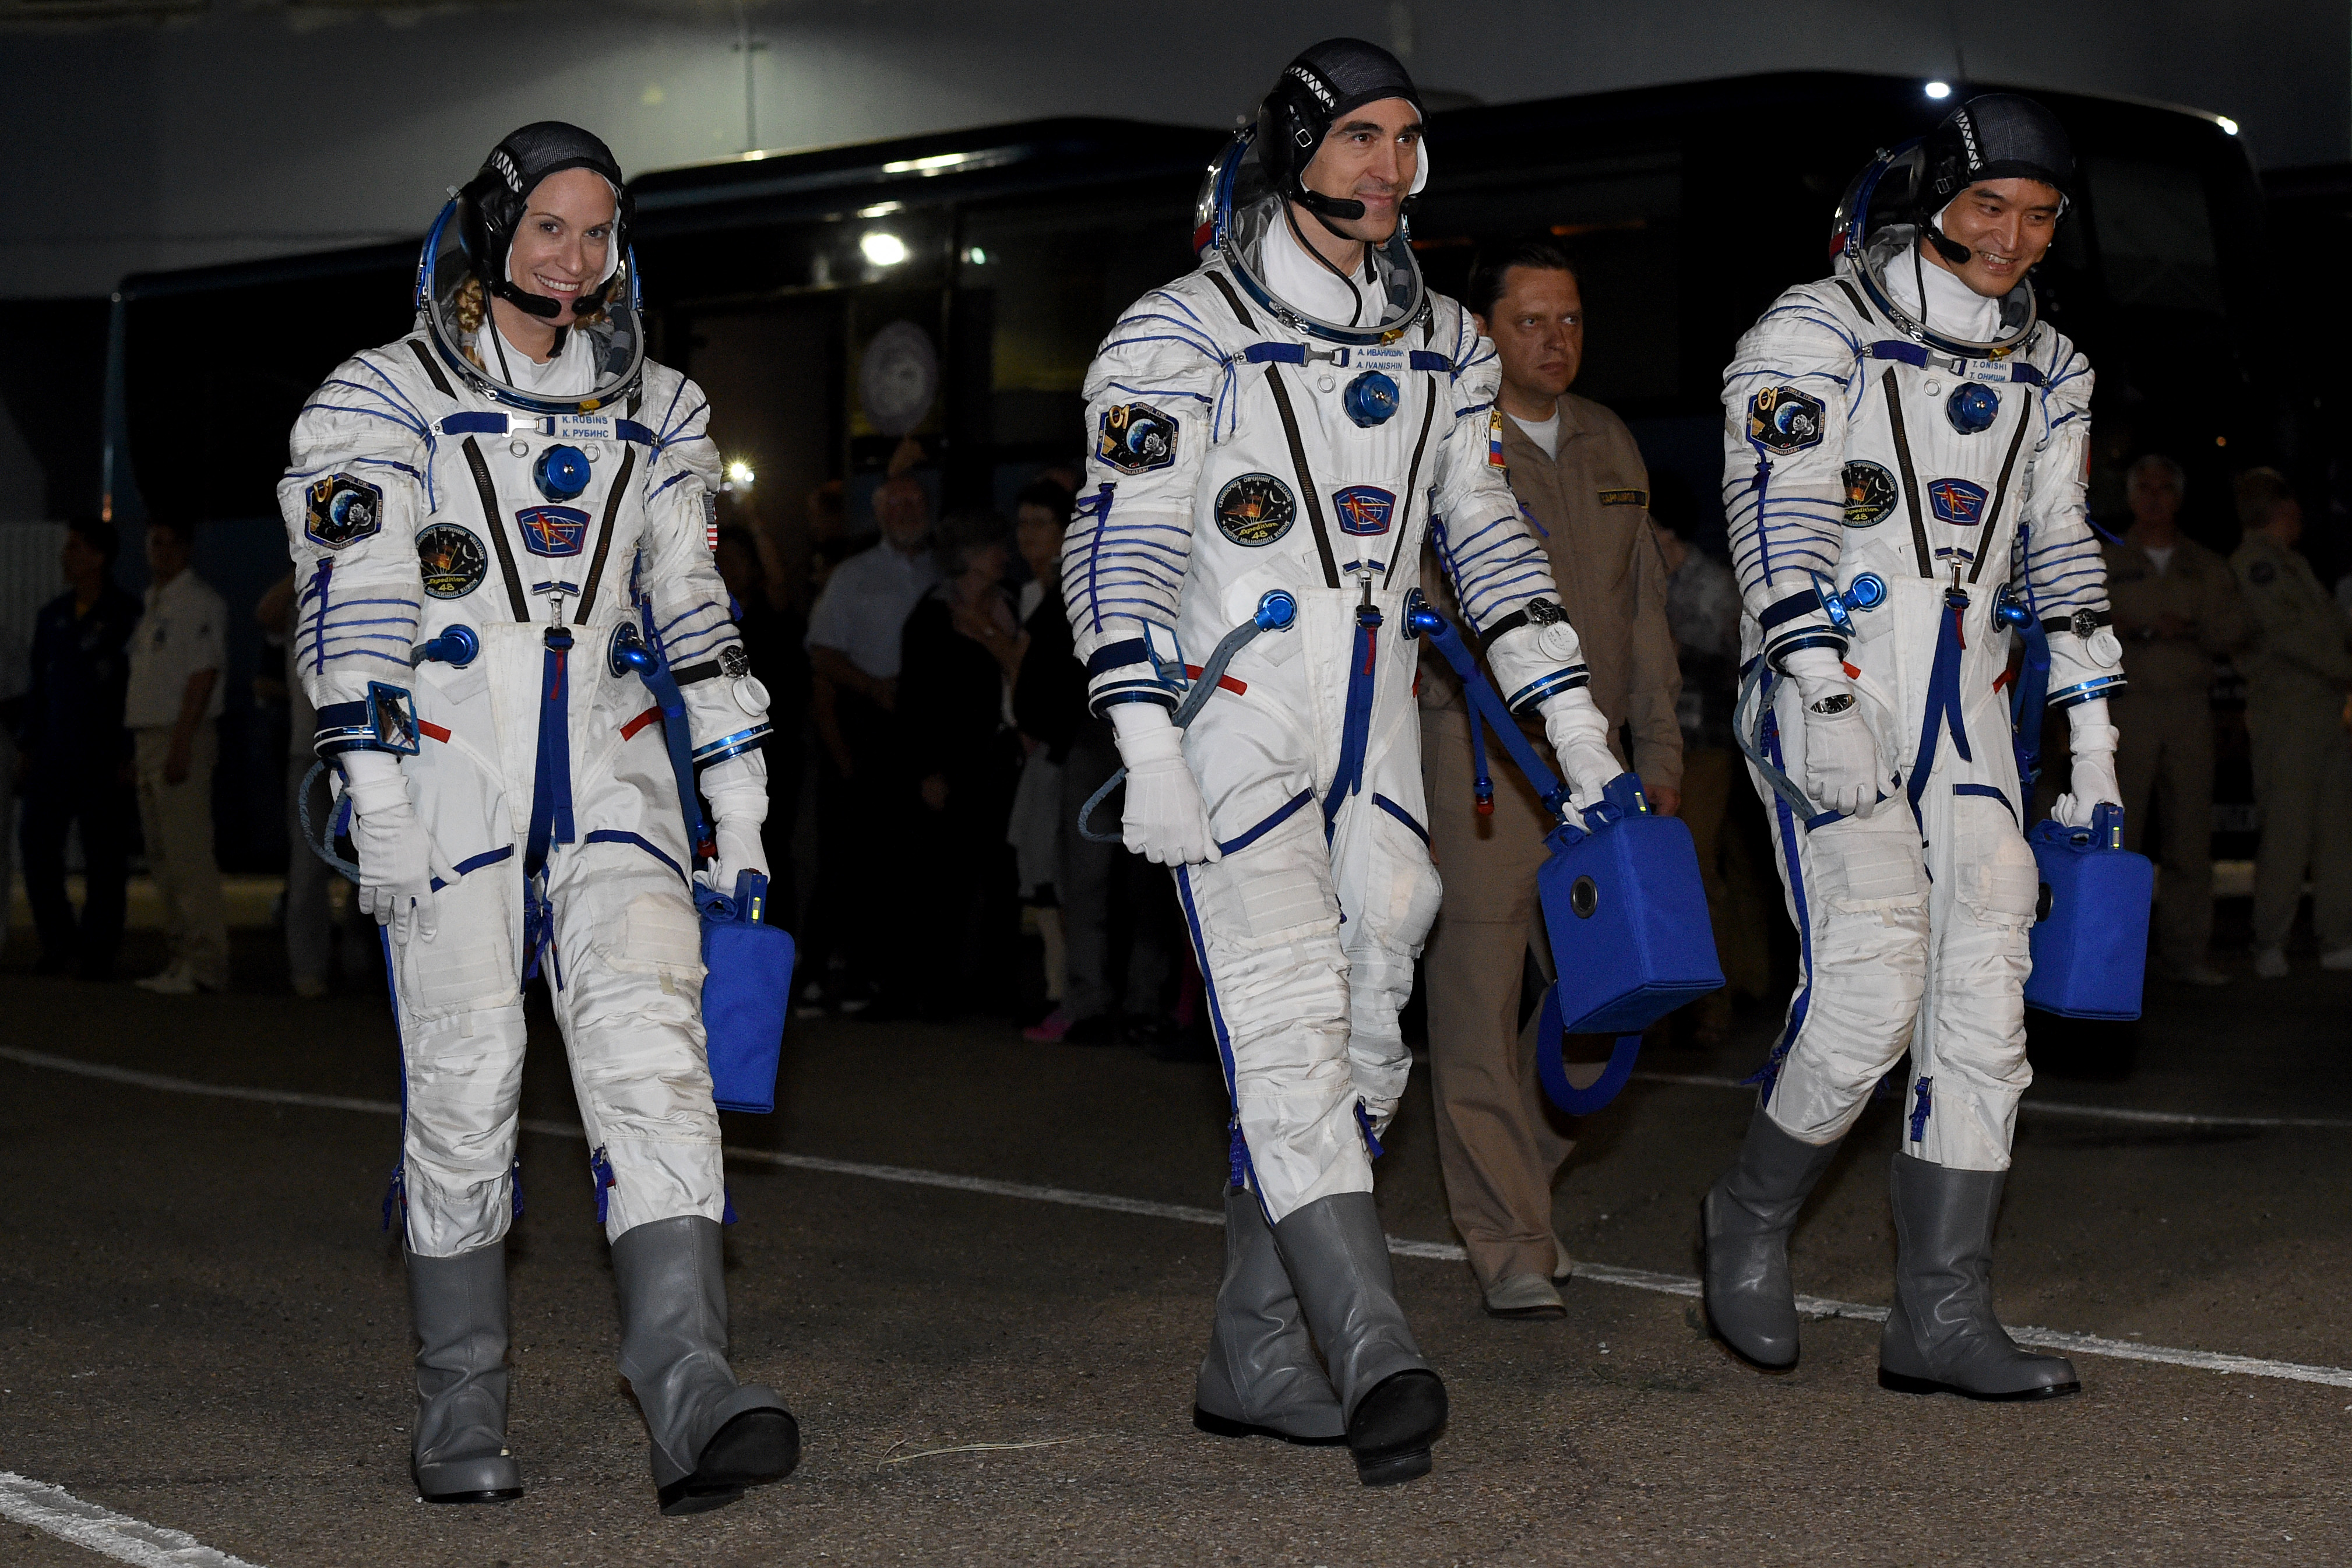 (L-R) US astronaut from NASA Kate Rubins, cosmonaut Anatoly Ivanishin of the Russian space agency Roscosmos and astronaut Takuya Onishi of the Japan Aerospace Exploration Agency walk after their space suits were tested at the Russian-leased Baikonur cosmodrome in Kazakhstan, prior to blasting off to the International Space Station (ISS) early on July 7, 2016 local time. They will launch at 9:36 p.m. (7:36 a.m. Baikonur time, July 7, 2016) from the Baikonur Cosmodrome in Kazakhstan. All three will spend approximately four months on the orbital complex, returning to Earth in October. / AFP PHOTO / VASILY MAXIMOV